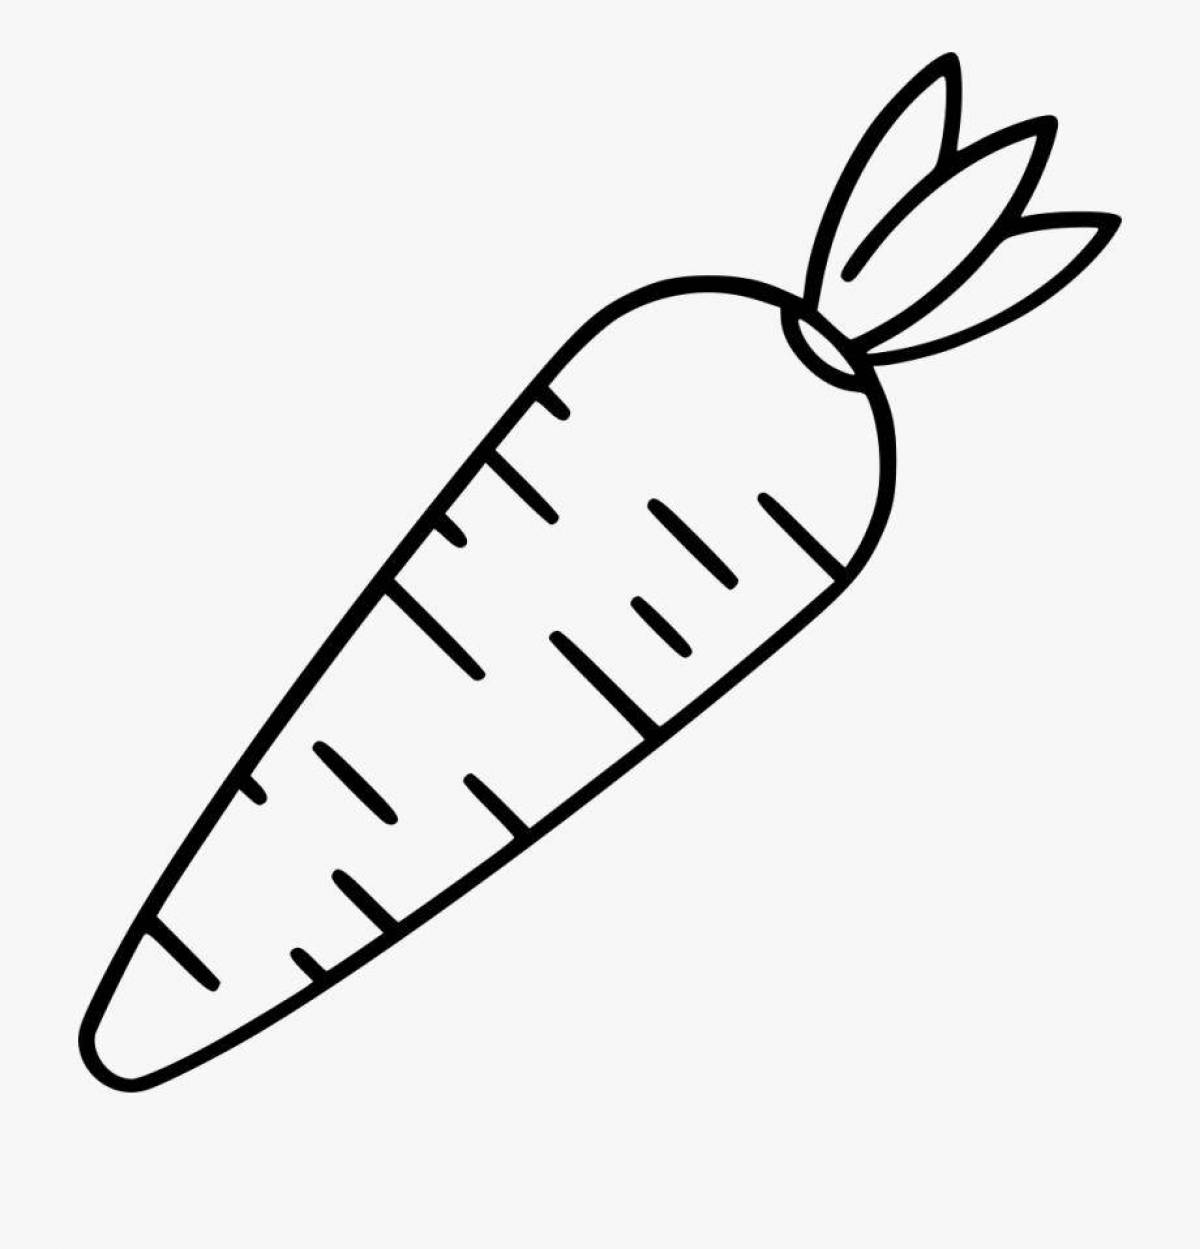 Intriguing carrot coloring book